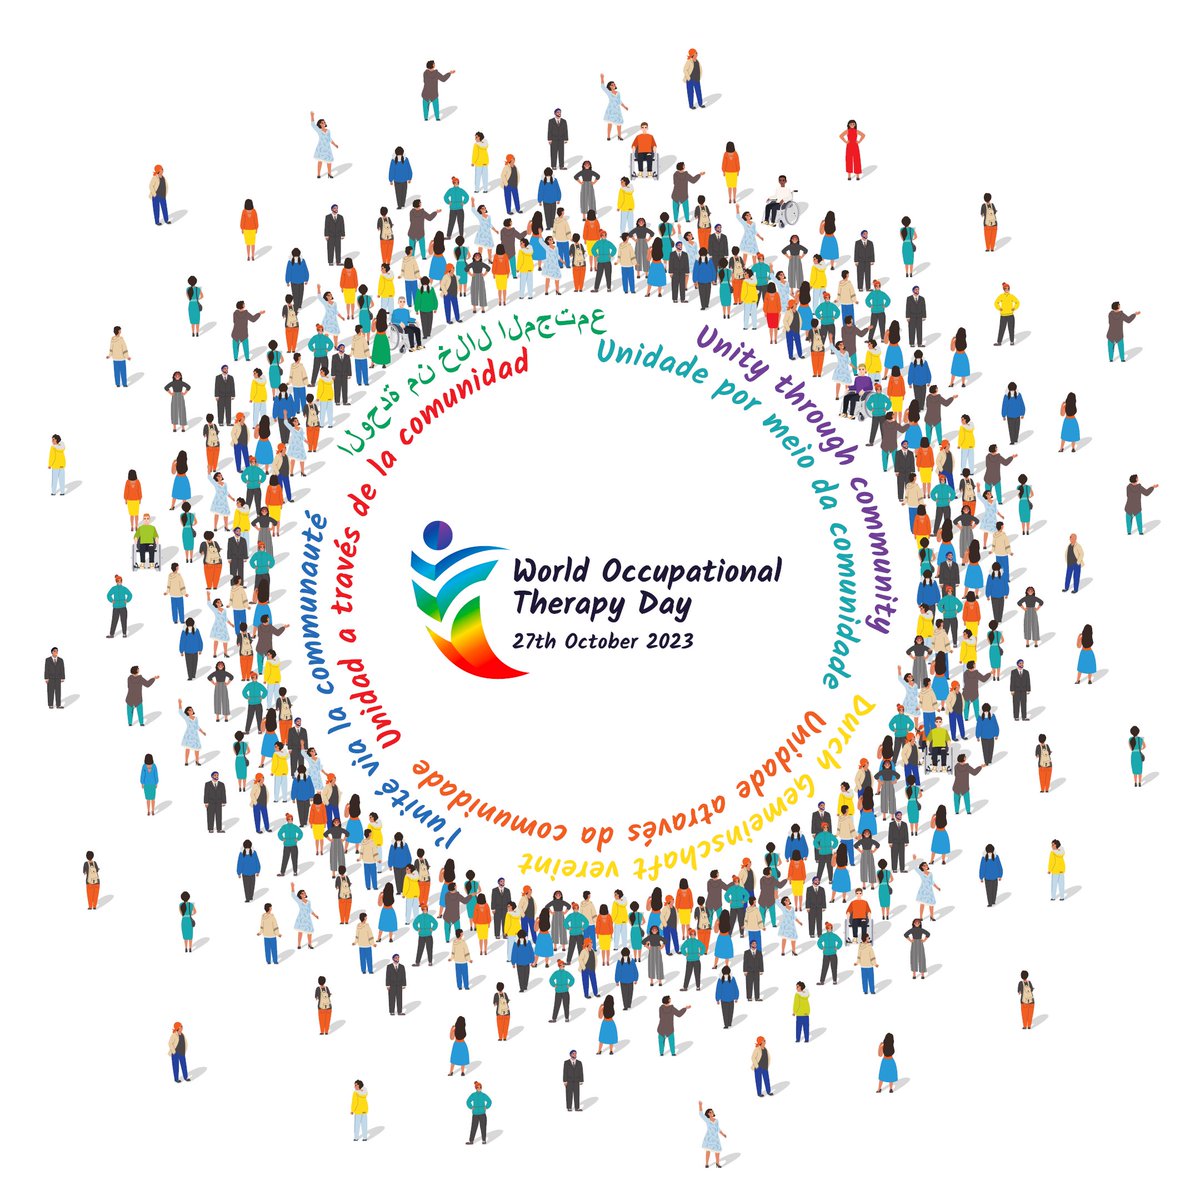 Happy World Occupational Therapy Day, a time for reflection on how many lives Occupational Therapists around the world have supported. Also gets me excited to connect the LYPFT OT community in less than 2 weeks. #OT #WFOT #WorldOTday